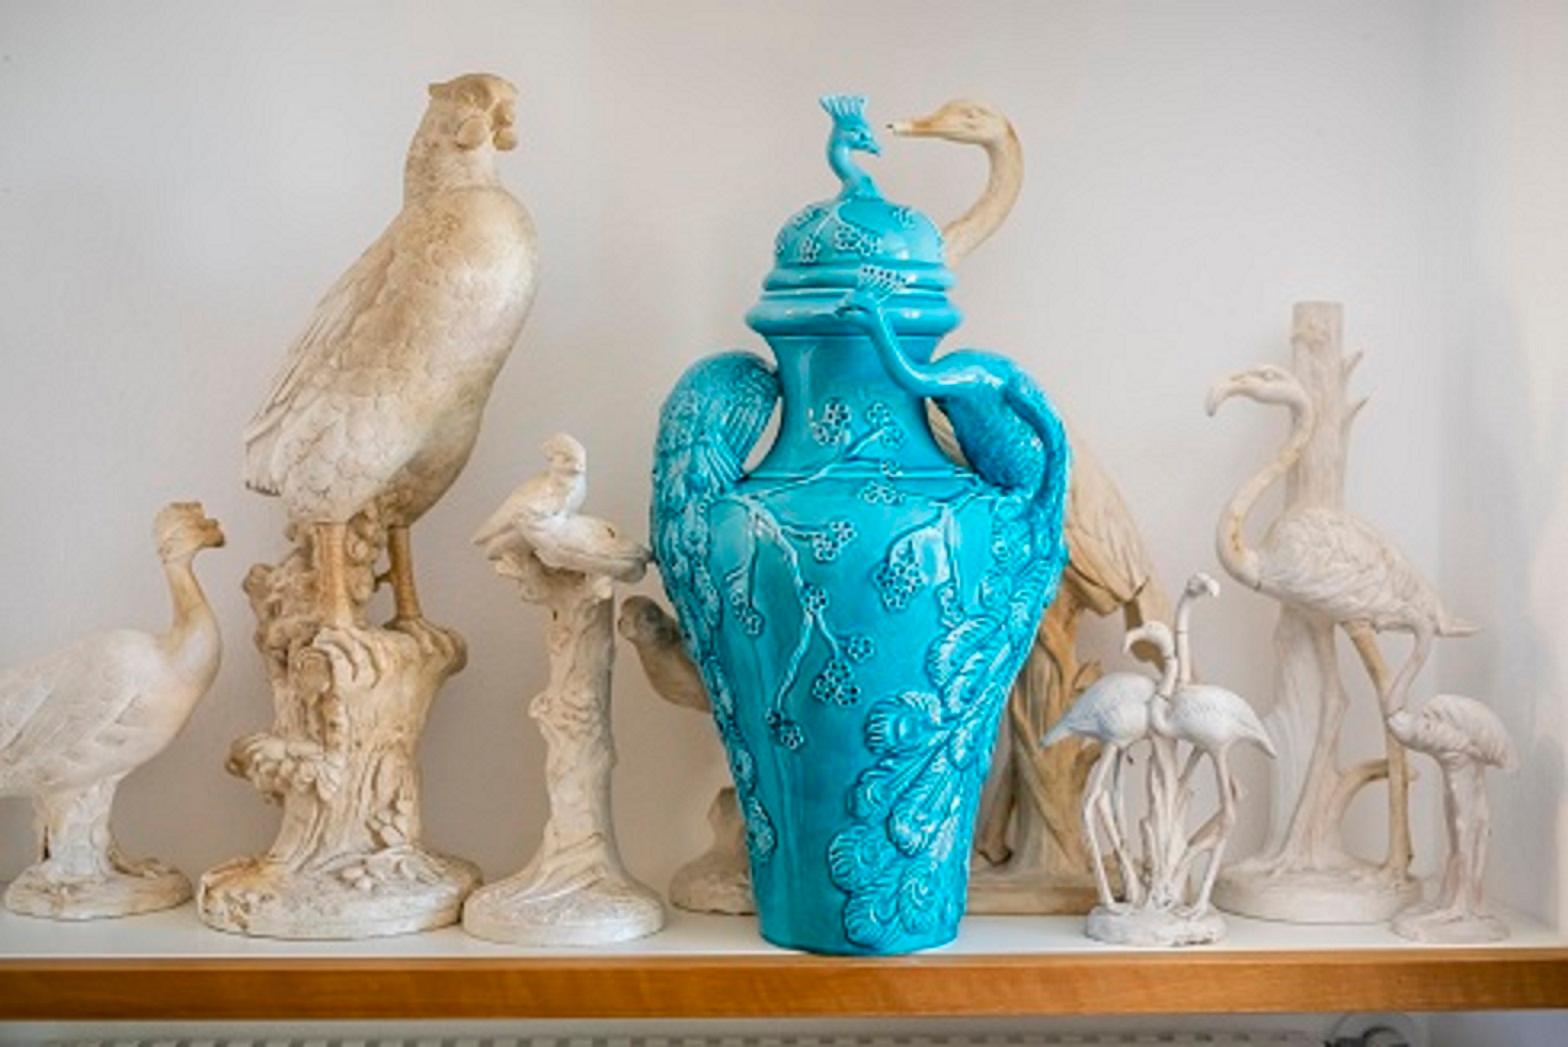 Beauty at its best
This stunning peacock vase is crafted in Italy by local artisans.